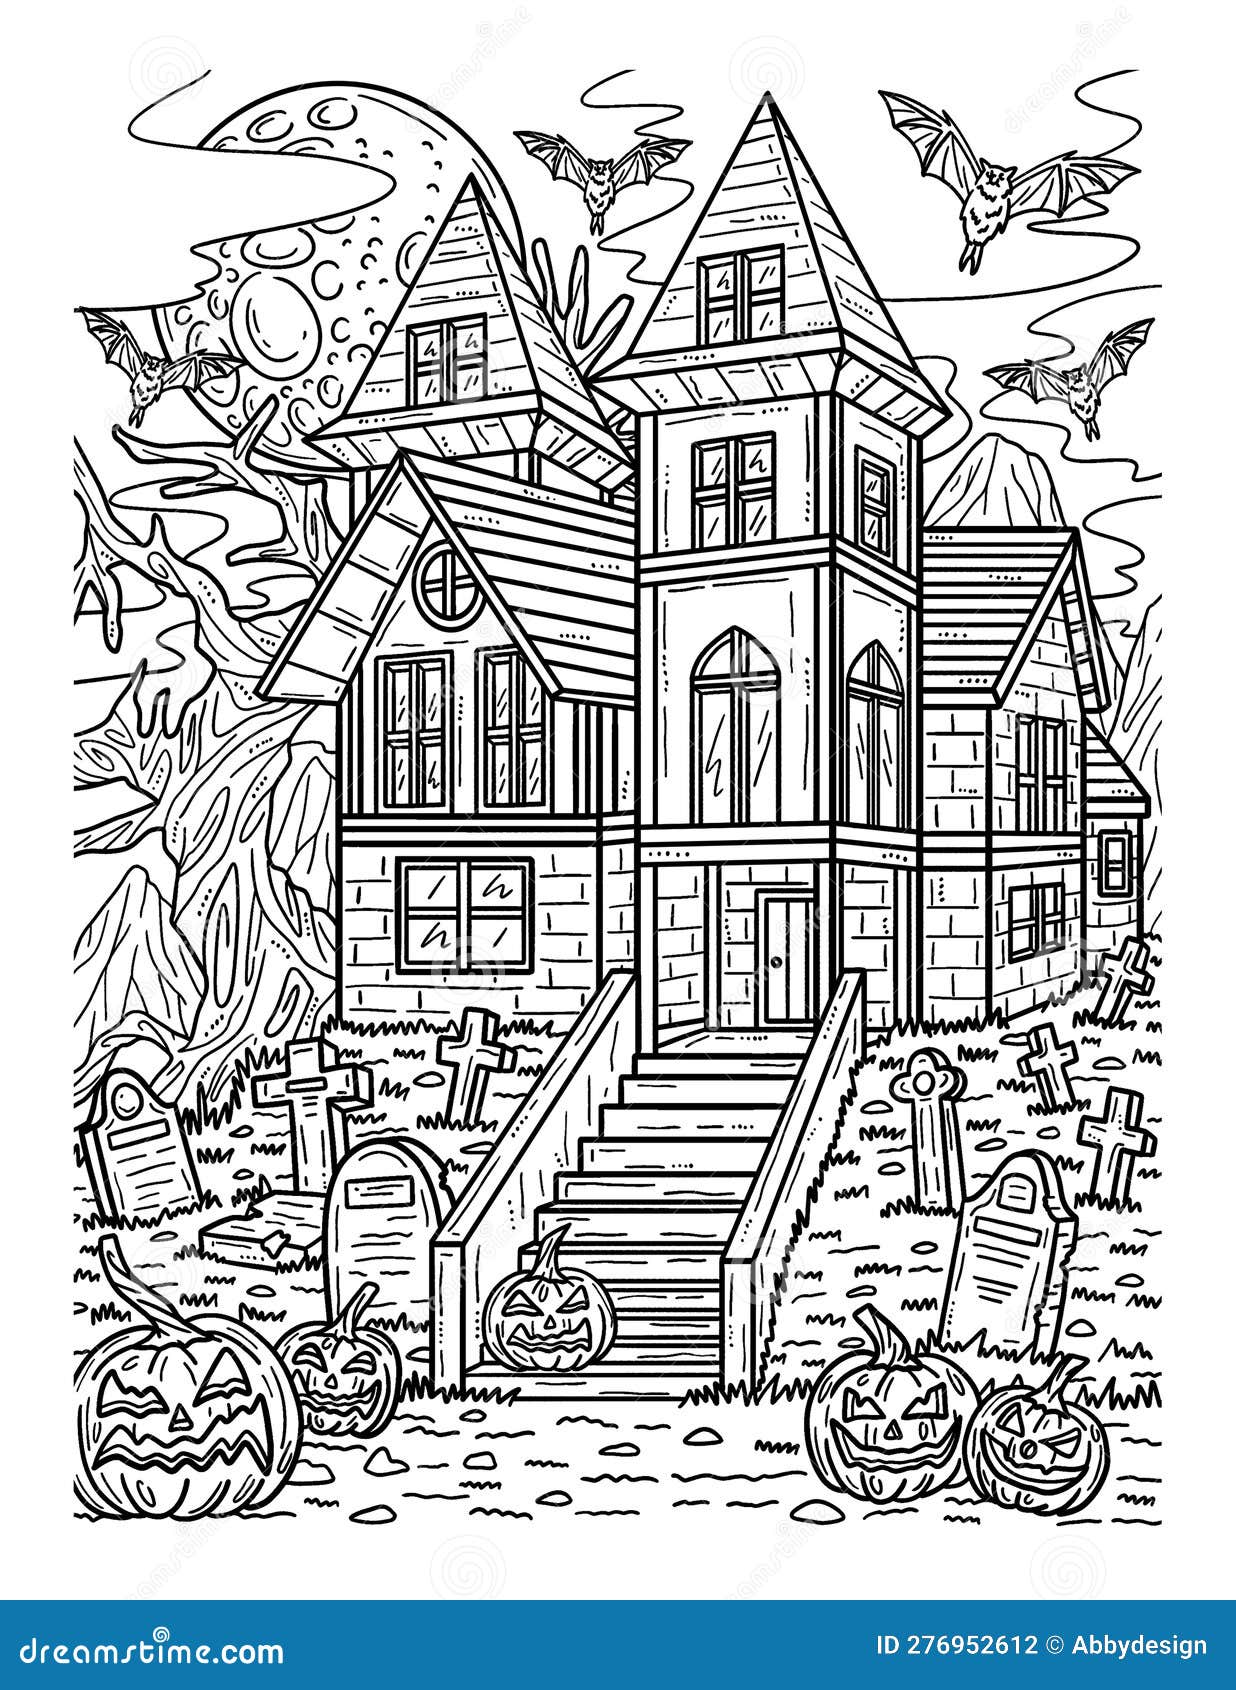 Halloween Haunted House Coloring Page for Adults Stock Vector ...